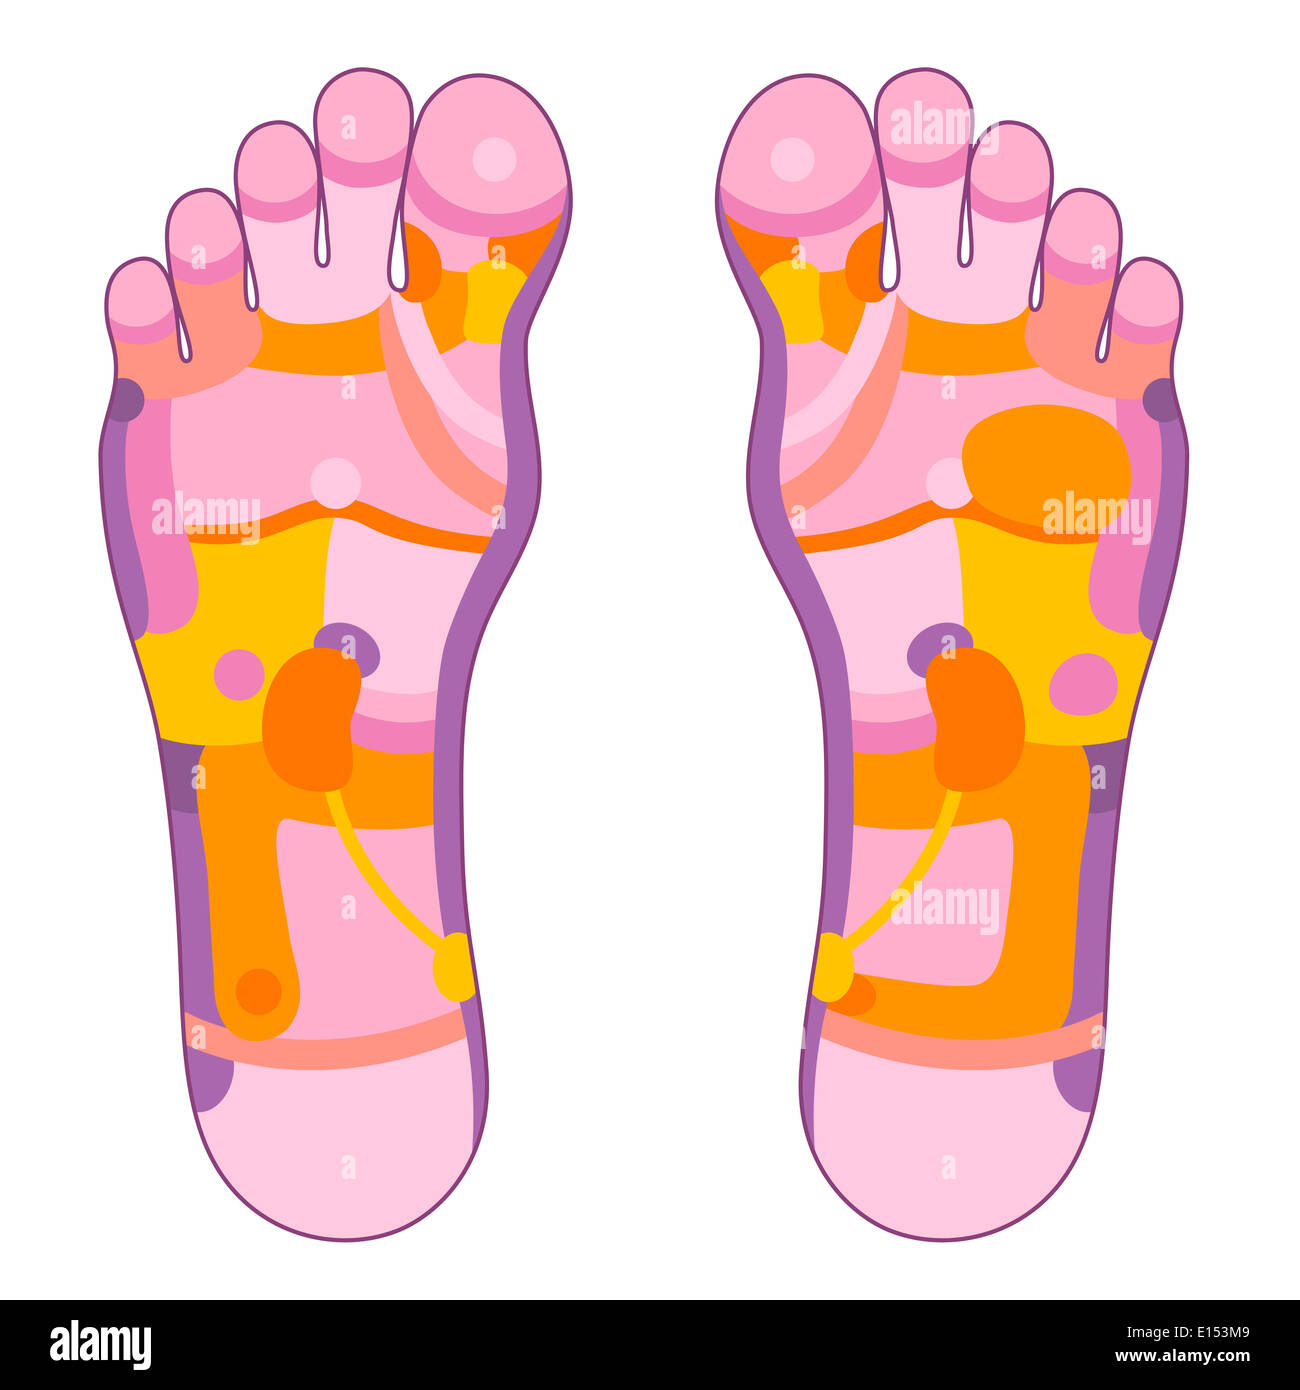 Foot reflexology illustration with different pink and orange colors concerning the corresponding internal organs and body parts. Stock Photo